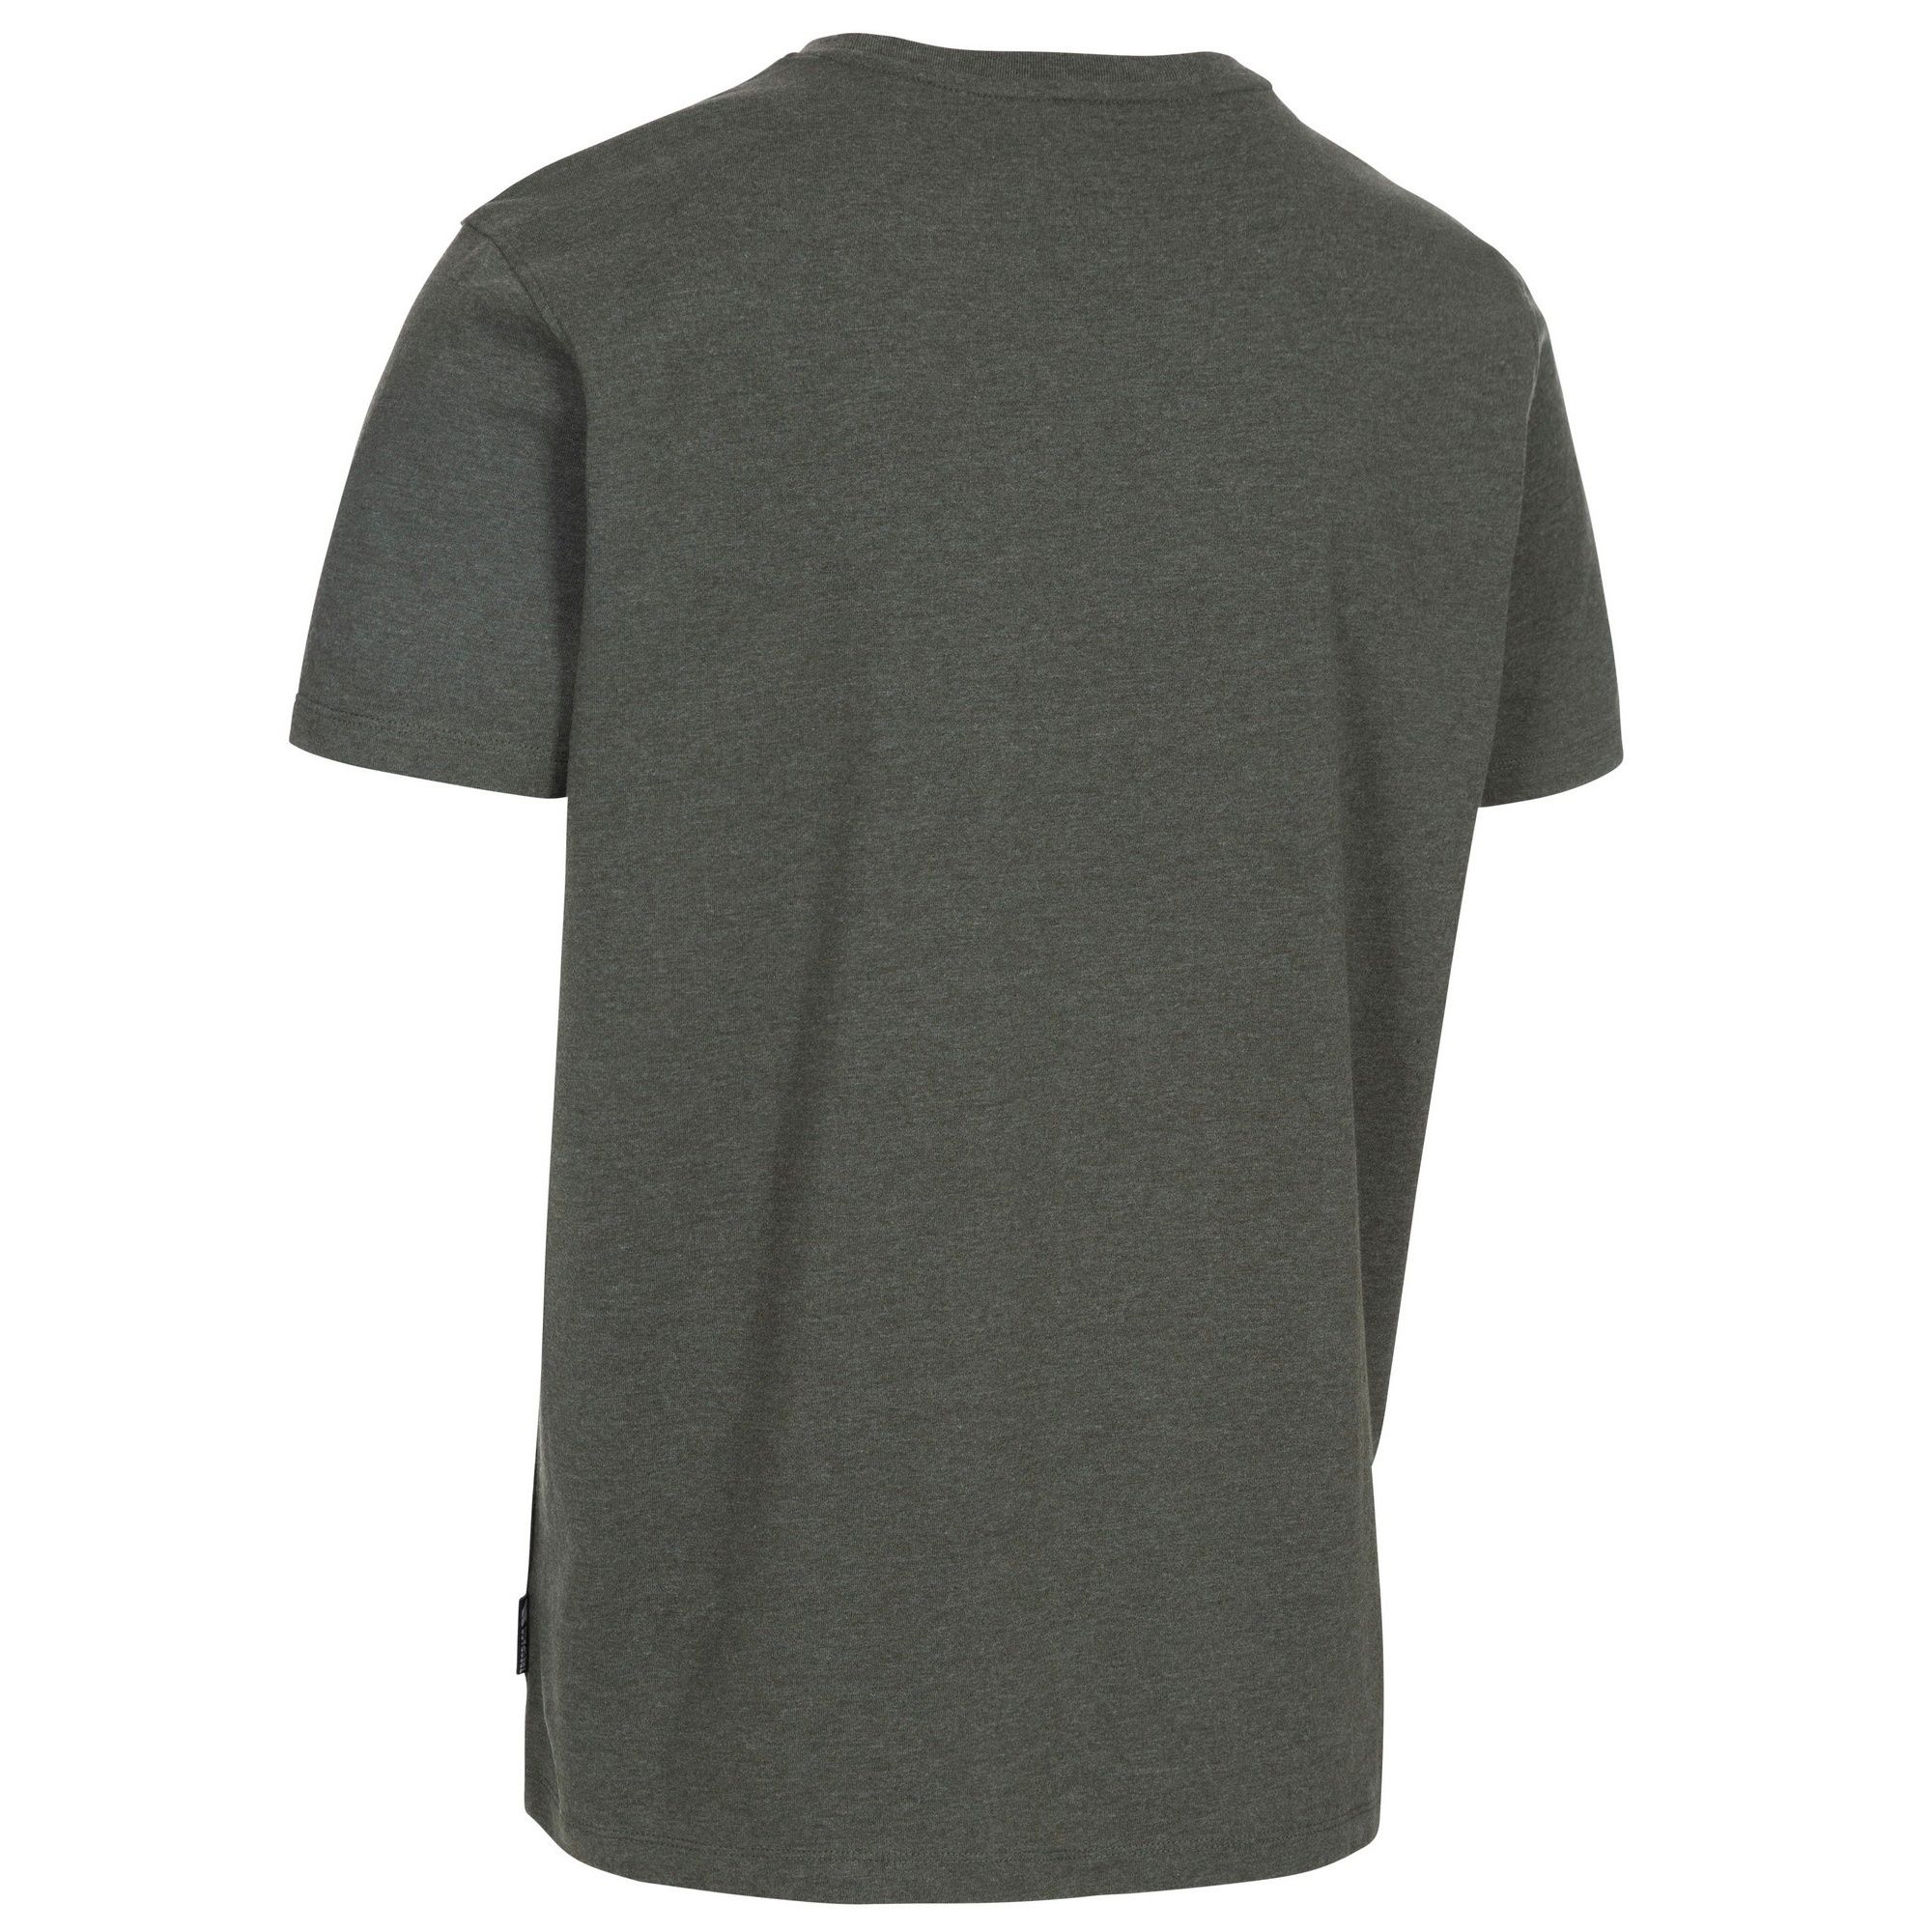 60% Cotton, 40% Polyester. Short sleeves. Round neck. Print on chest. Wicking. Quick dry. Trespass Mens Chest Sizing (approx): S - 35-37in/89-94cm, M - 38-40in/96.5-101.5cm, L - 41-43in/104-109cm, XL - 44-46in/111.5-117cm, XXL - 46-48in/117-122cm, 3XL - 48-50in/122-127cm.